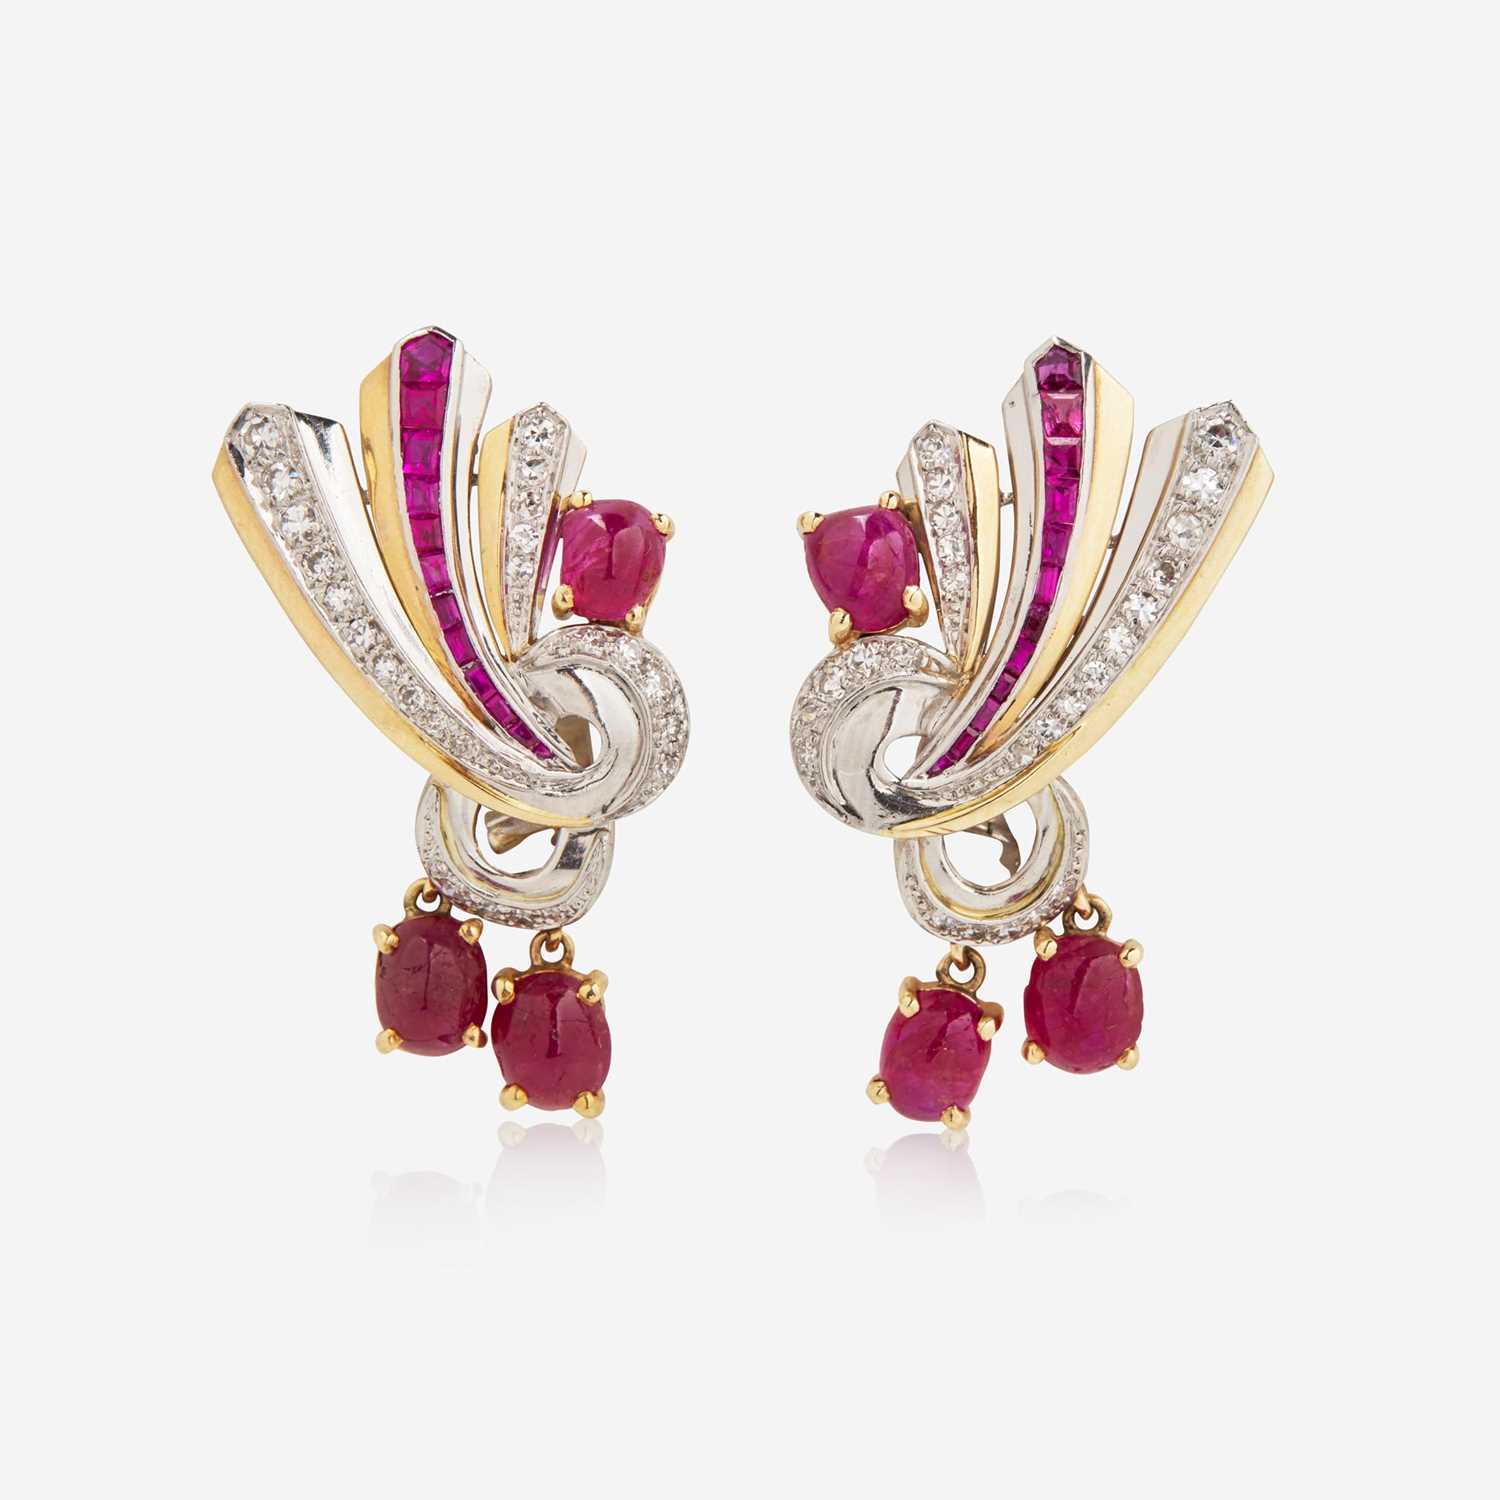 Lot 39 - A Pair of 18K Gold, Ruby, and Diamond Earrings